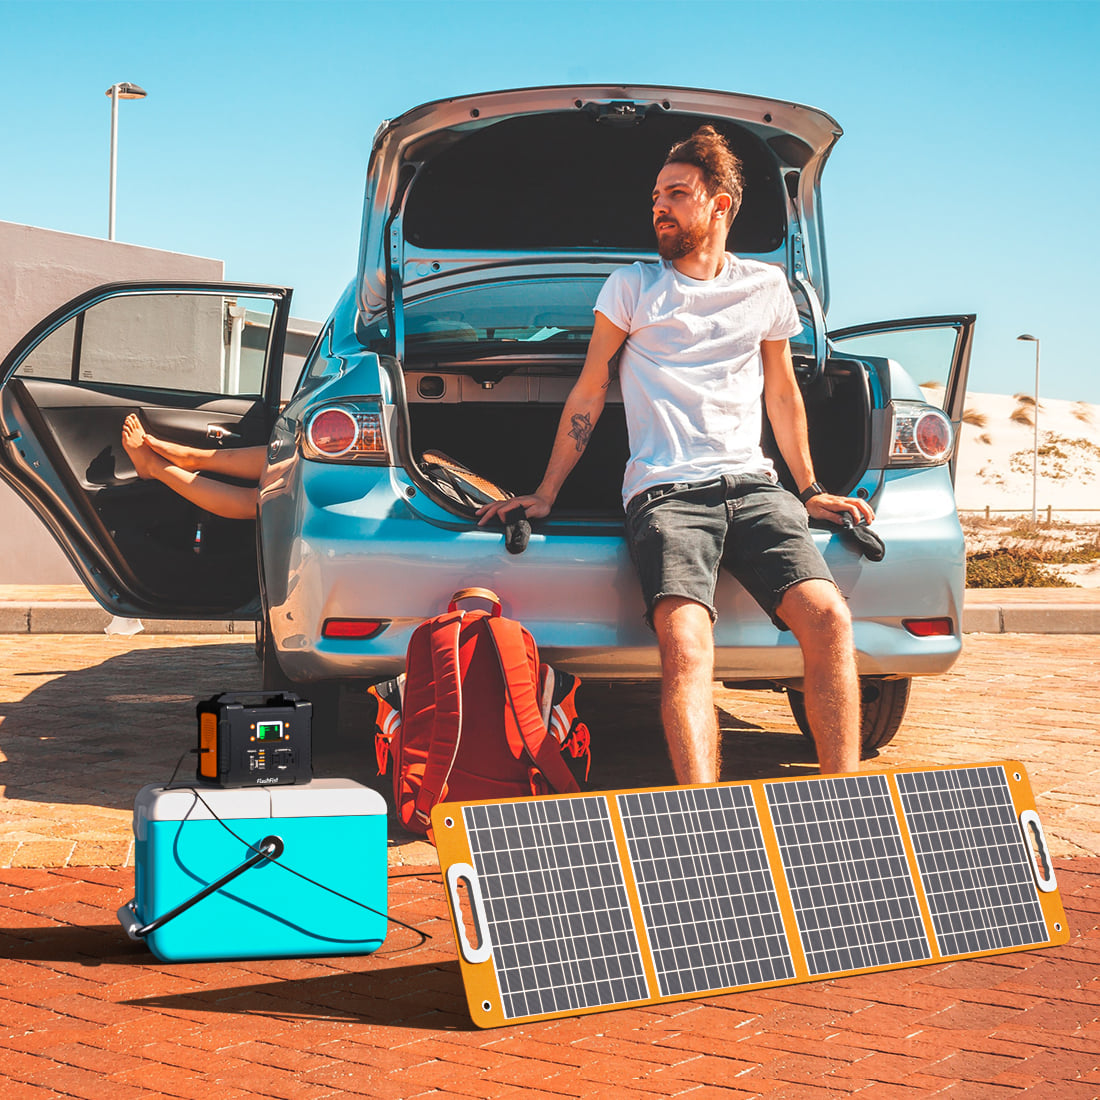 Buyers Guide: Why Do You Need A Solar Power Generators And Solar Panel?